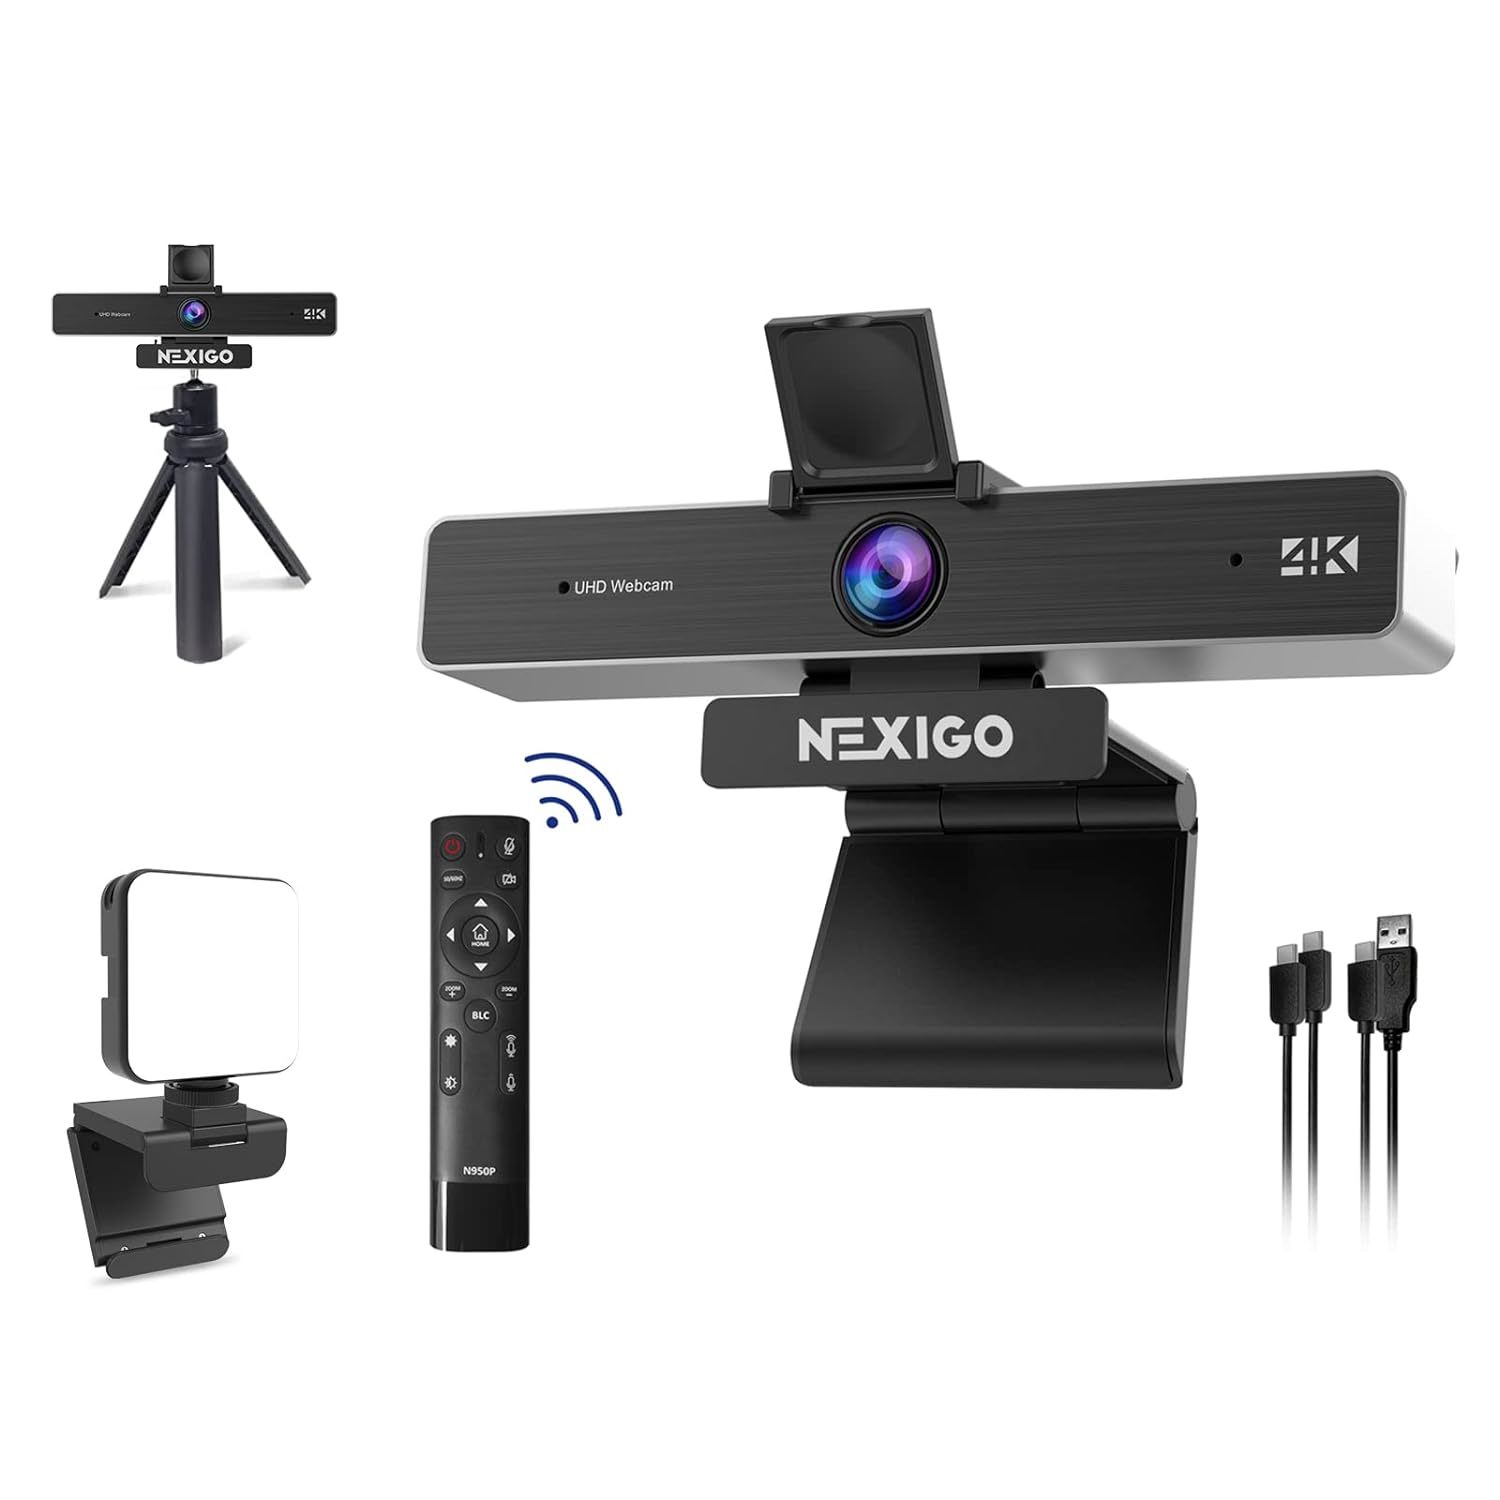 4K Zoomable Webcam Kits, N950P Uhd 2160P Webcam With Remote, Sony Starvis Sensor - $324.99